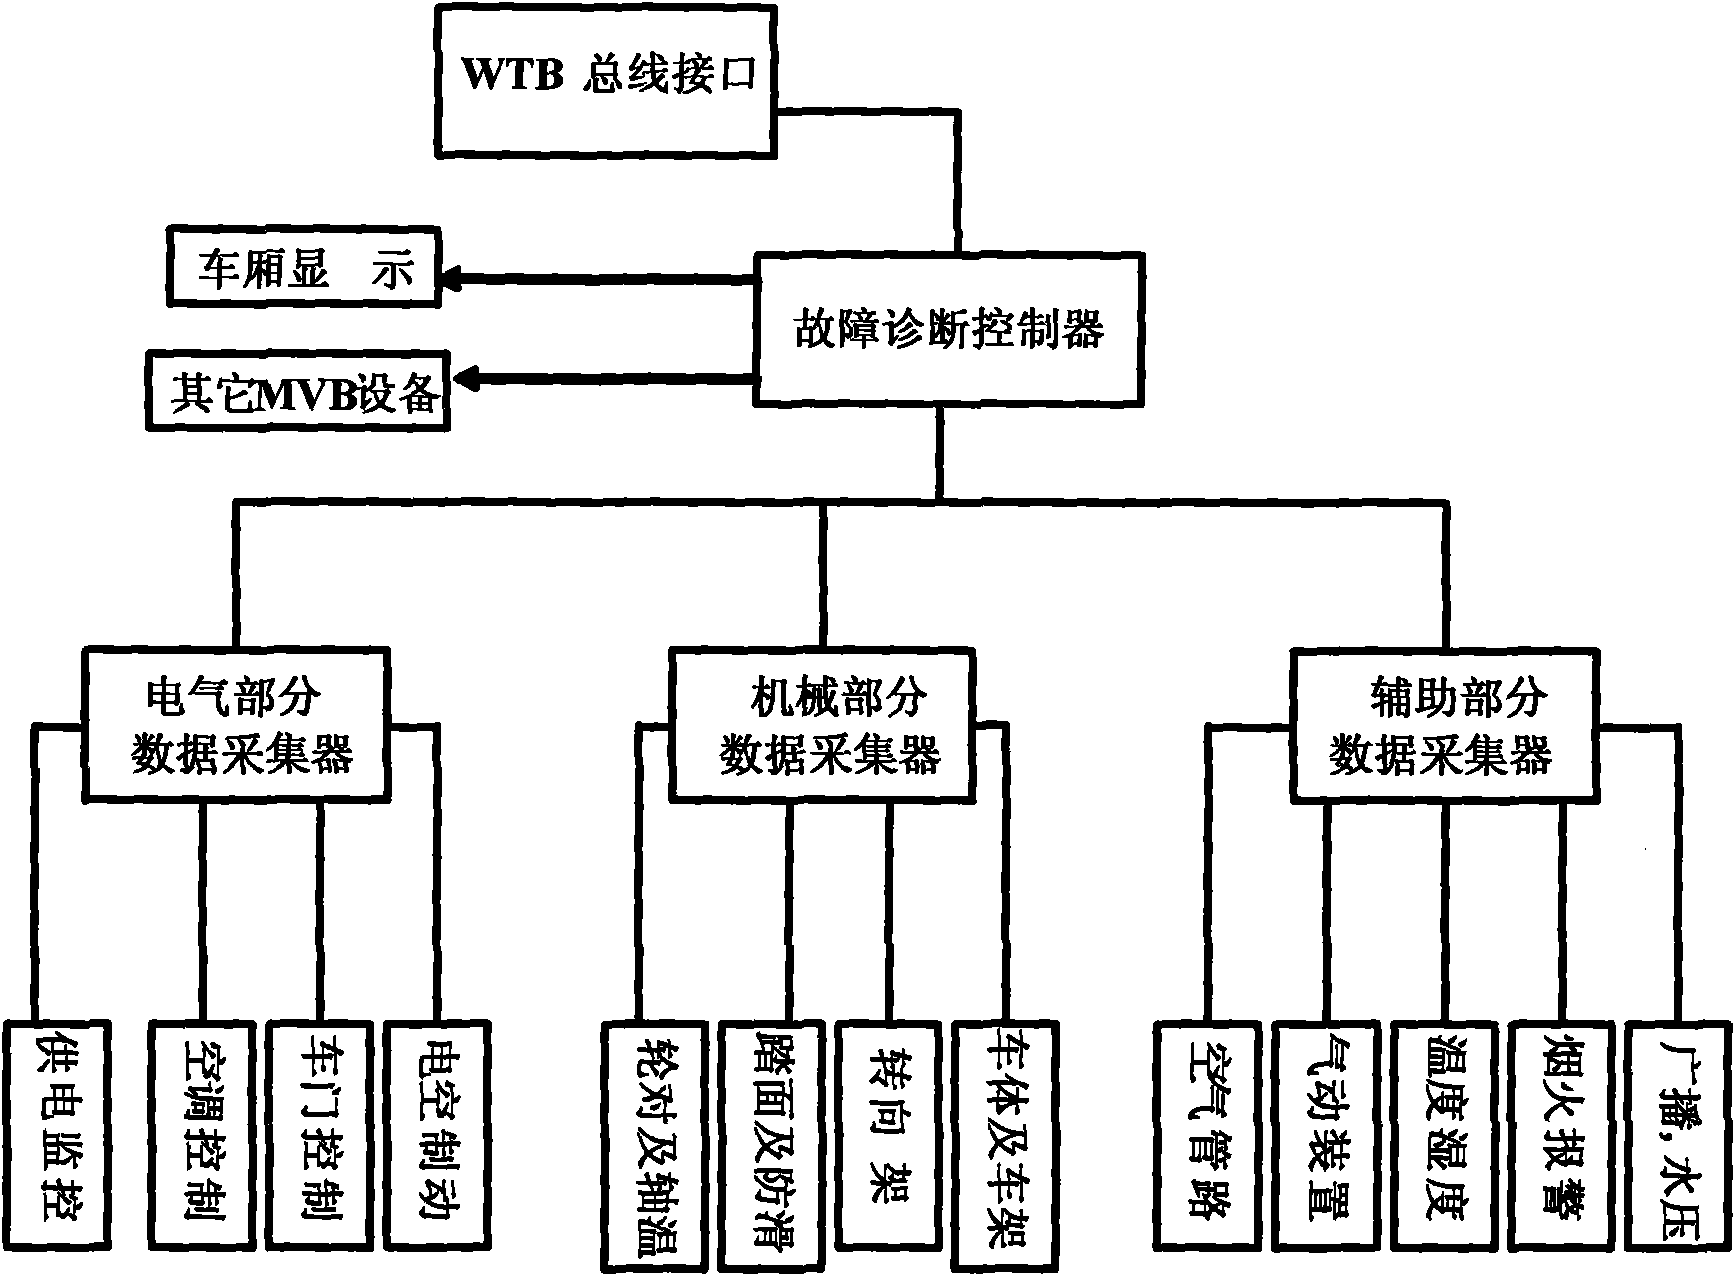 Safety monitoring and fault early warning system of networking train